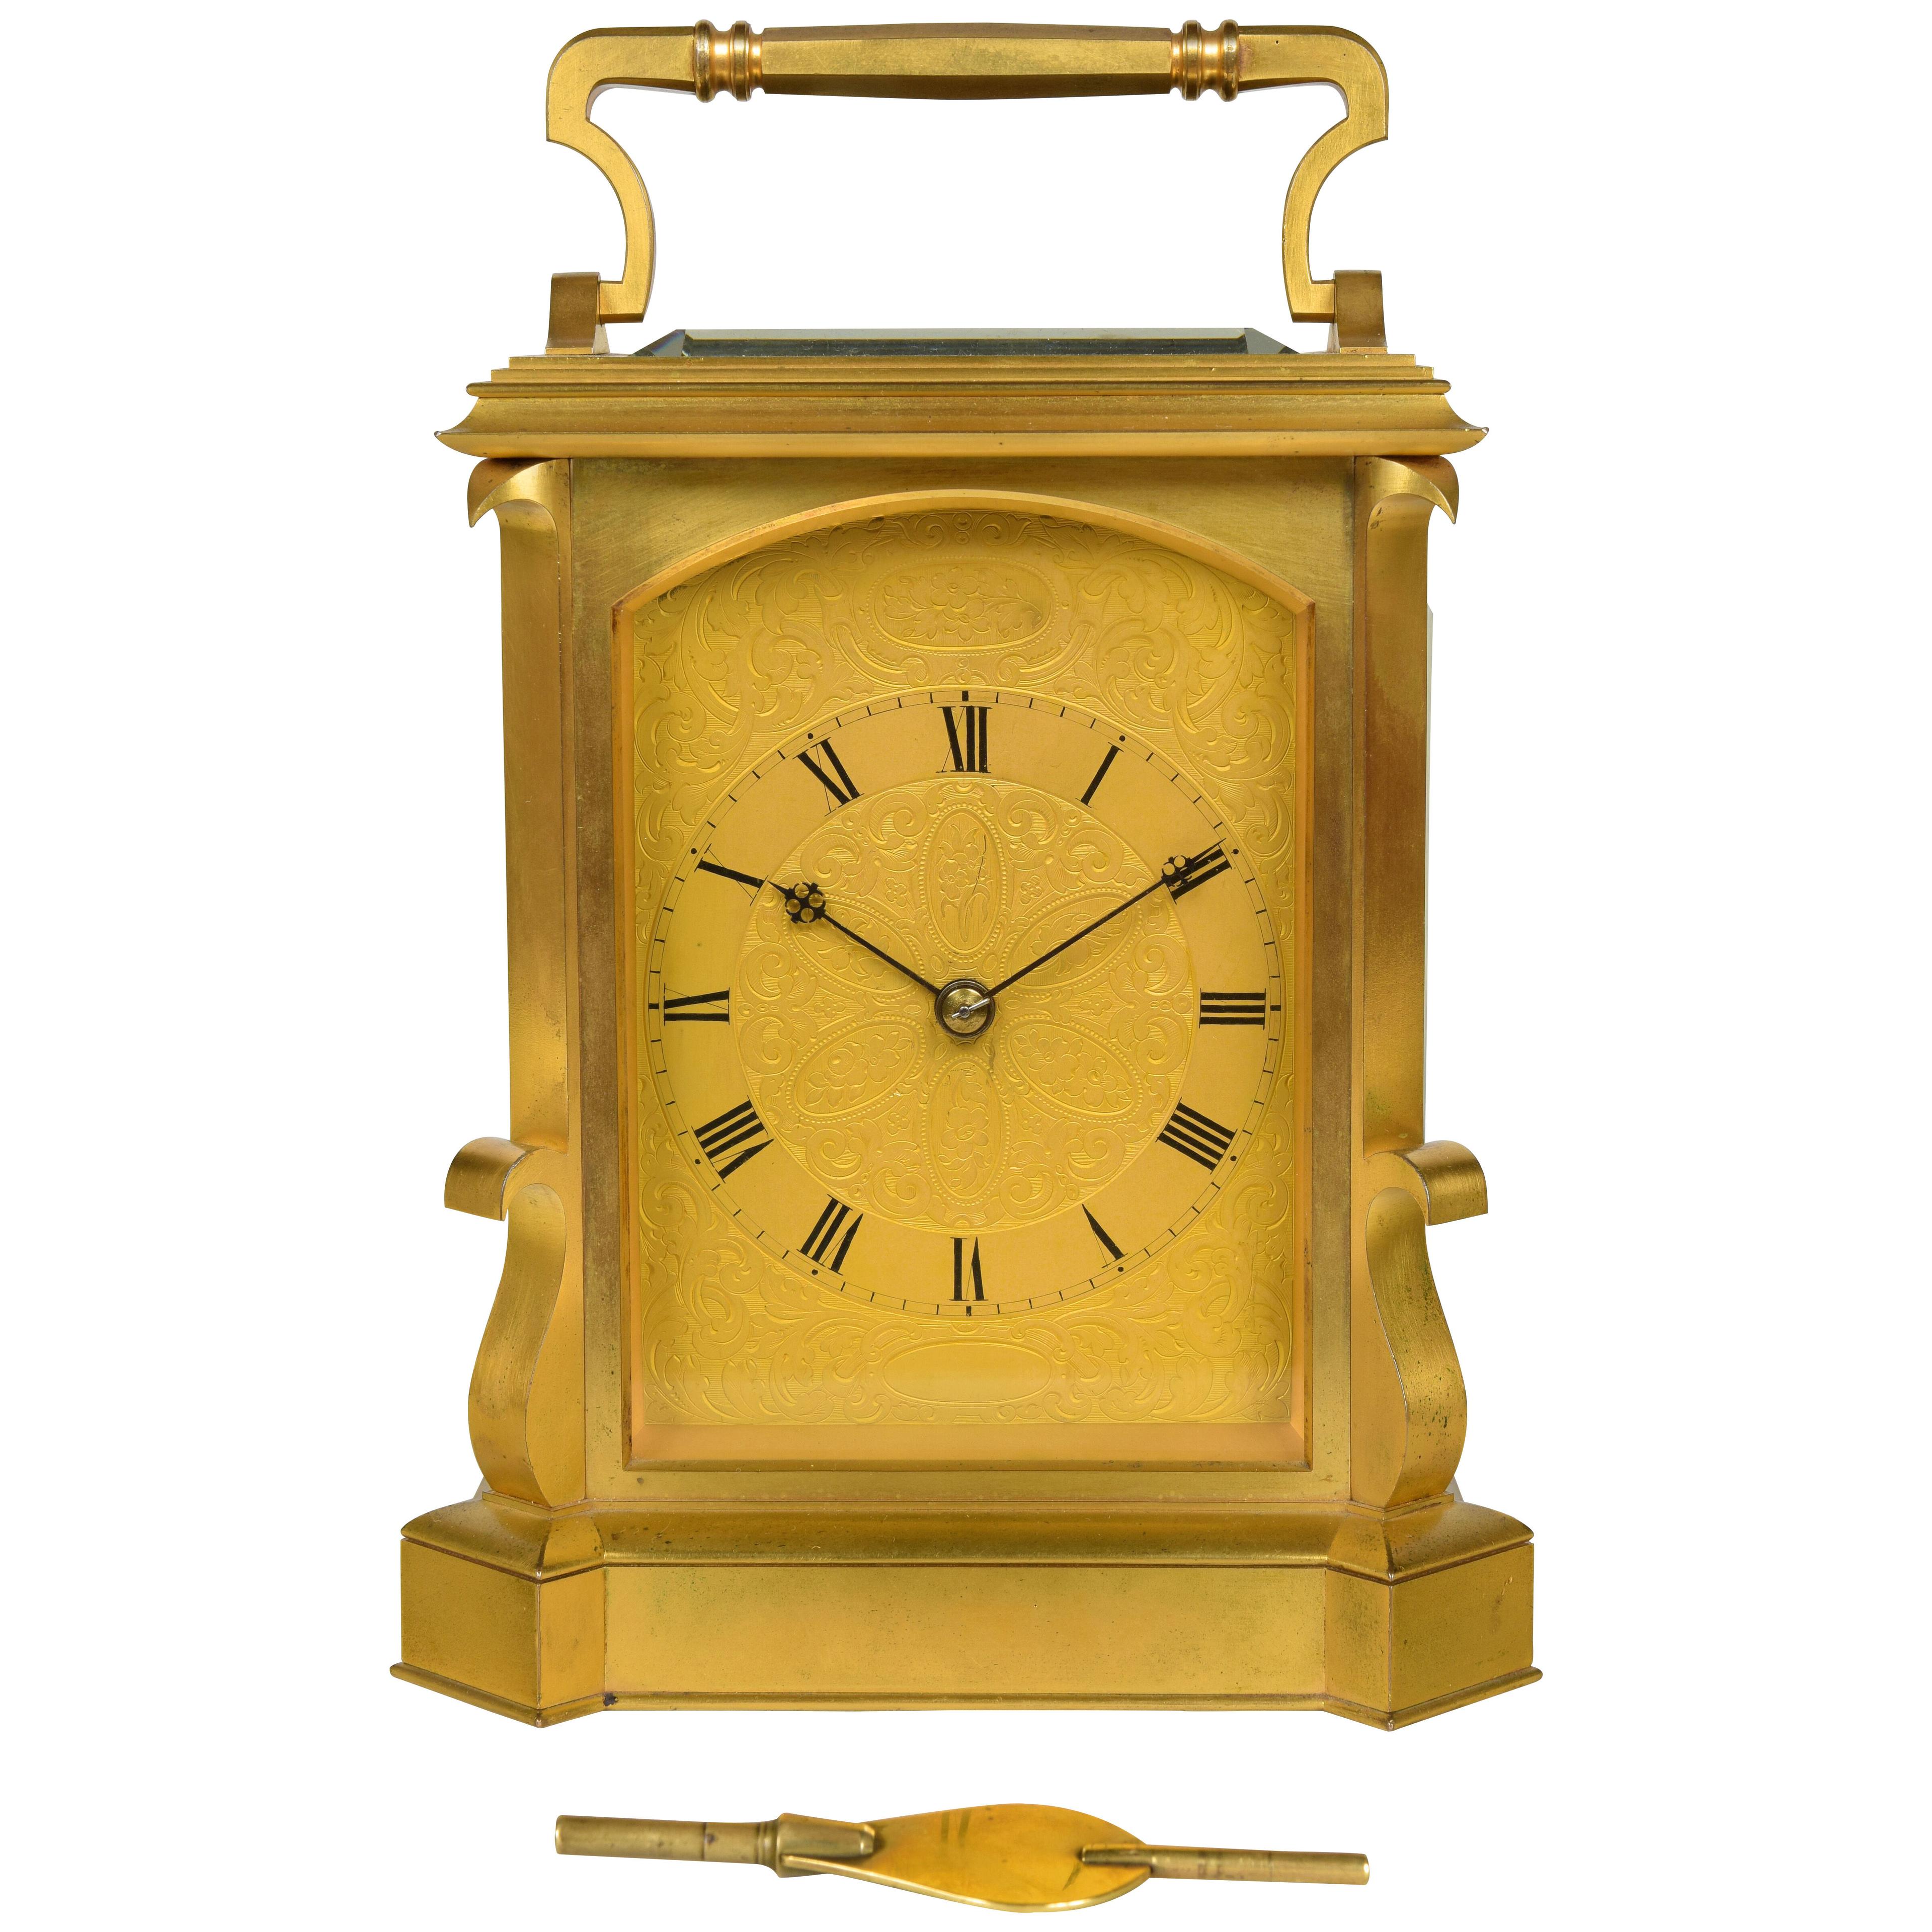 JOHN MOORE AND SONS. AN EXCEPTIONAL GIANT GILT BRONZE CARRIAGE CLOCK